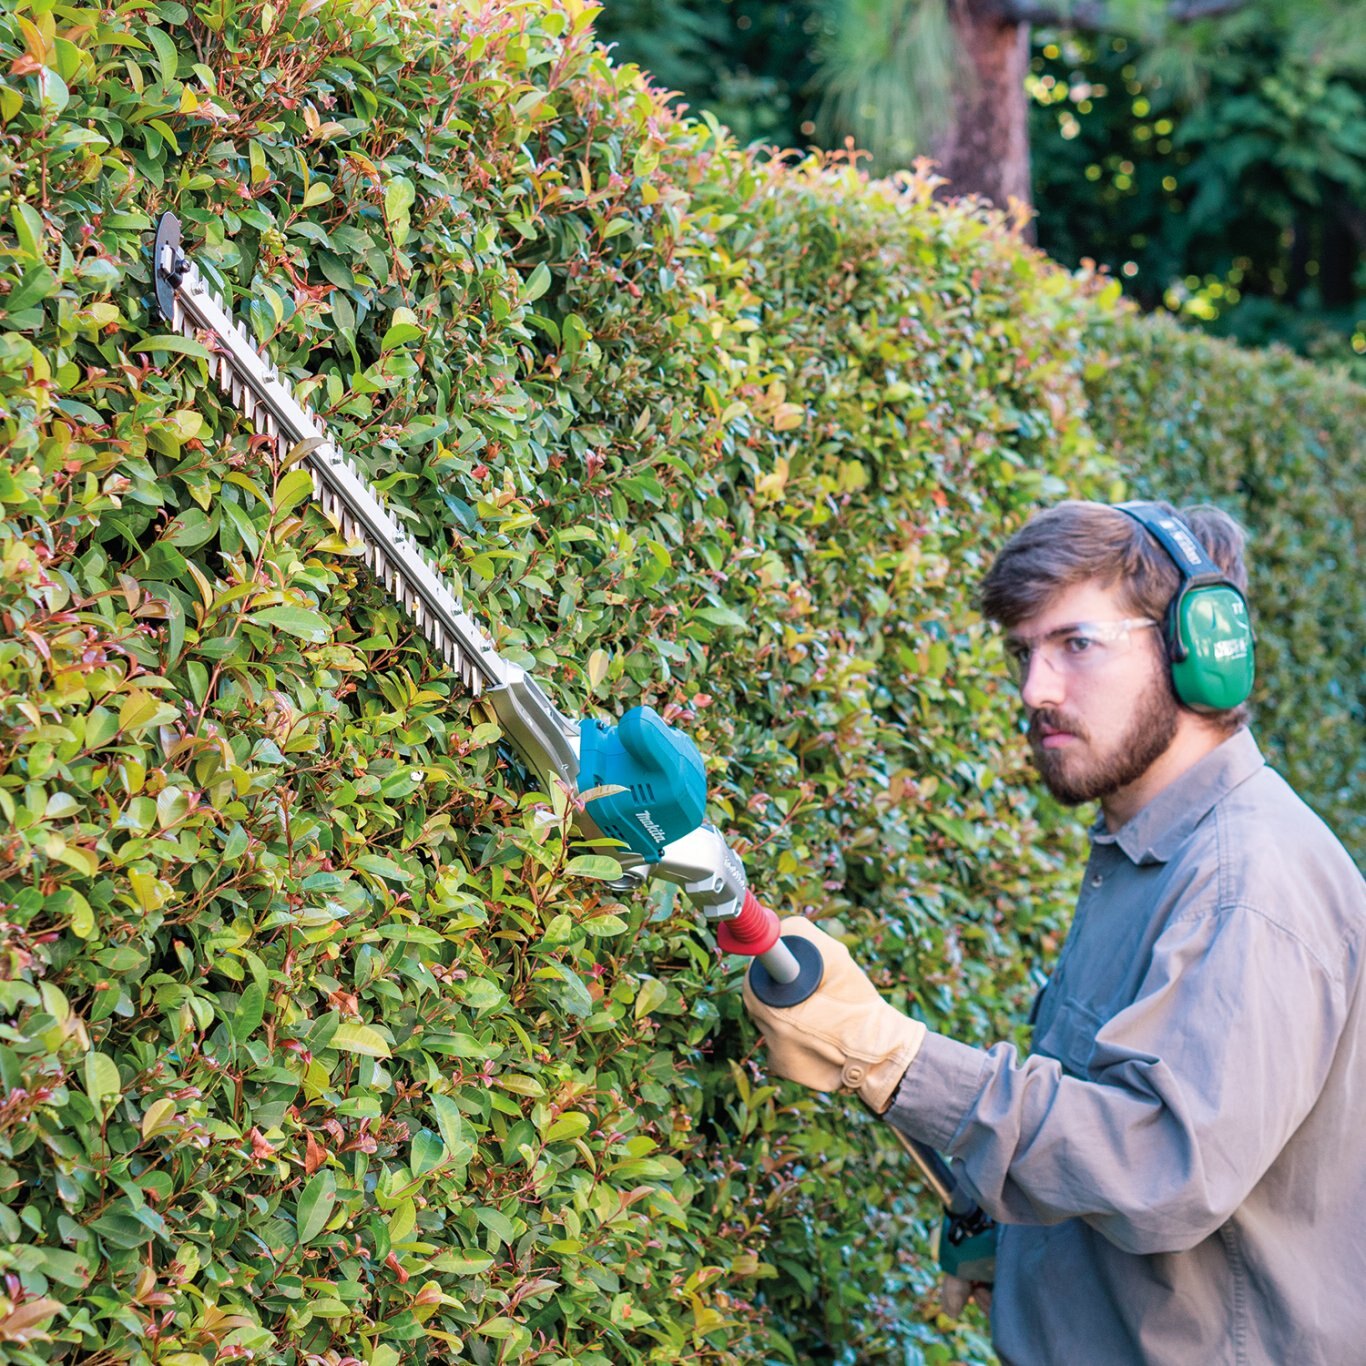 Makita 18V LXT® Lithium?Ion Brushless Cordless 20 Articulating Pole Hedge Trimmer, Tool Only